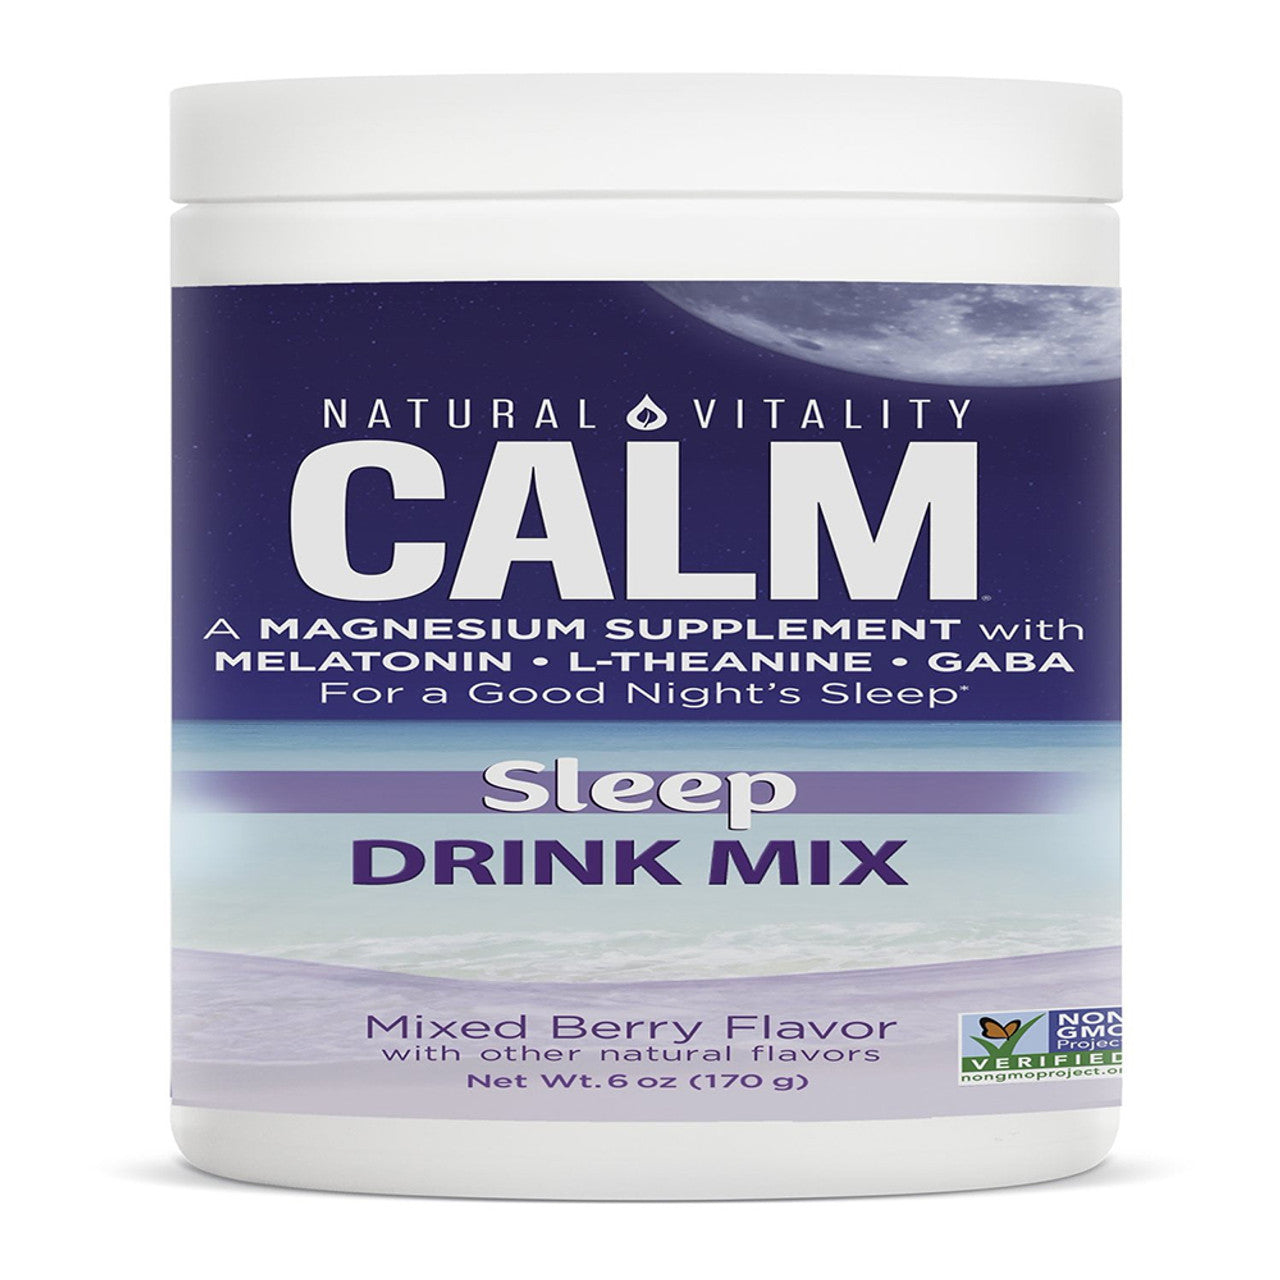 Natural Vitamins ality Calm Sleep Aid Drink Mix With Magnesium And Melatonin, Mixed Berry Flavored, 6 Oz